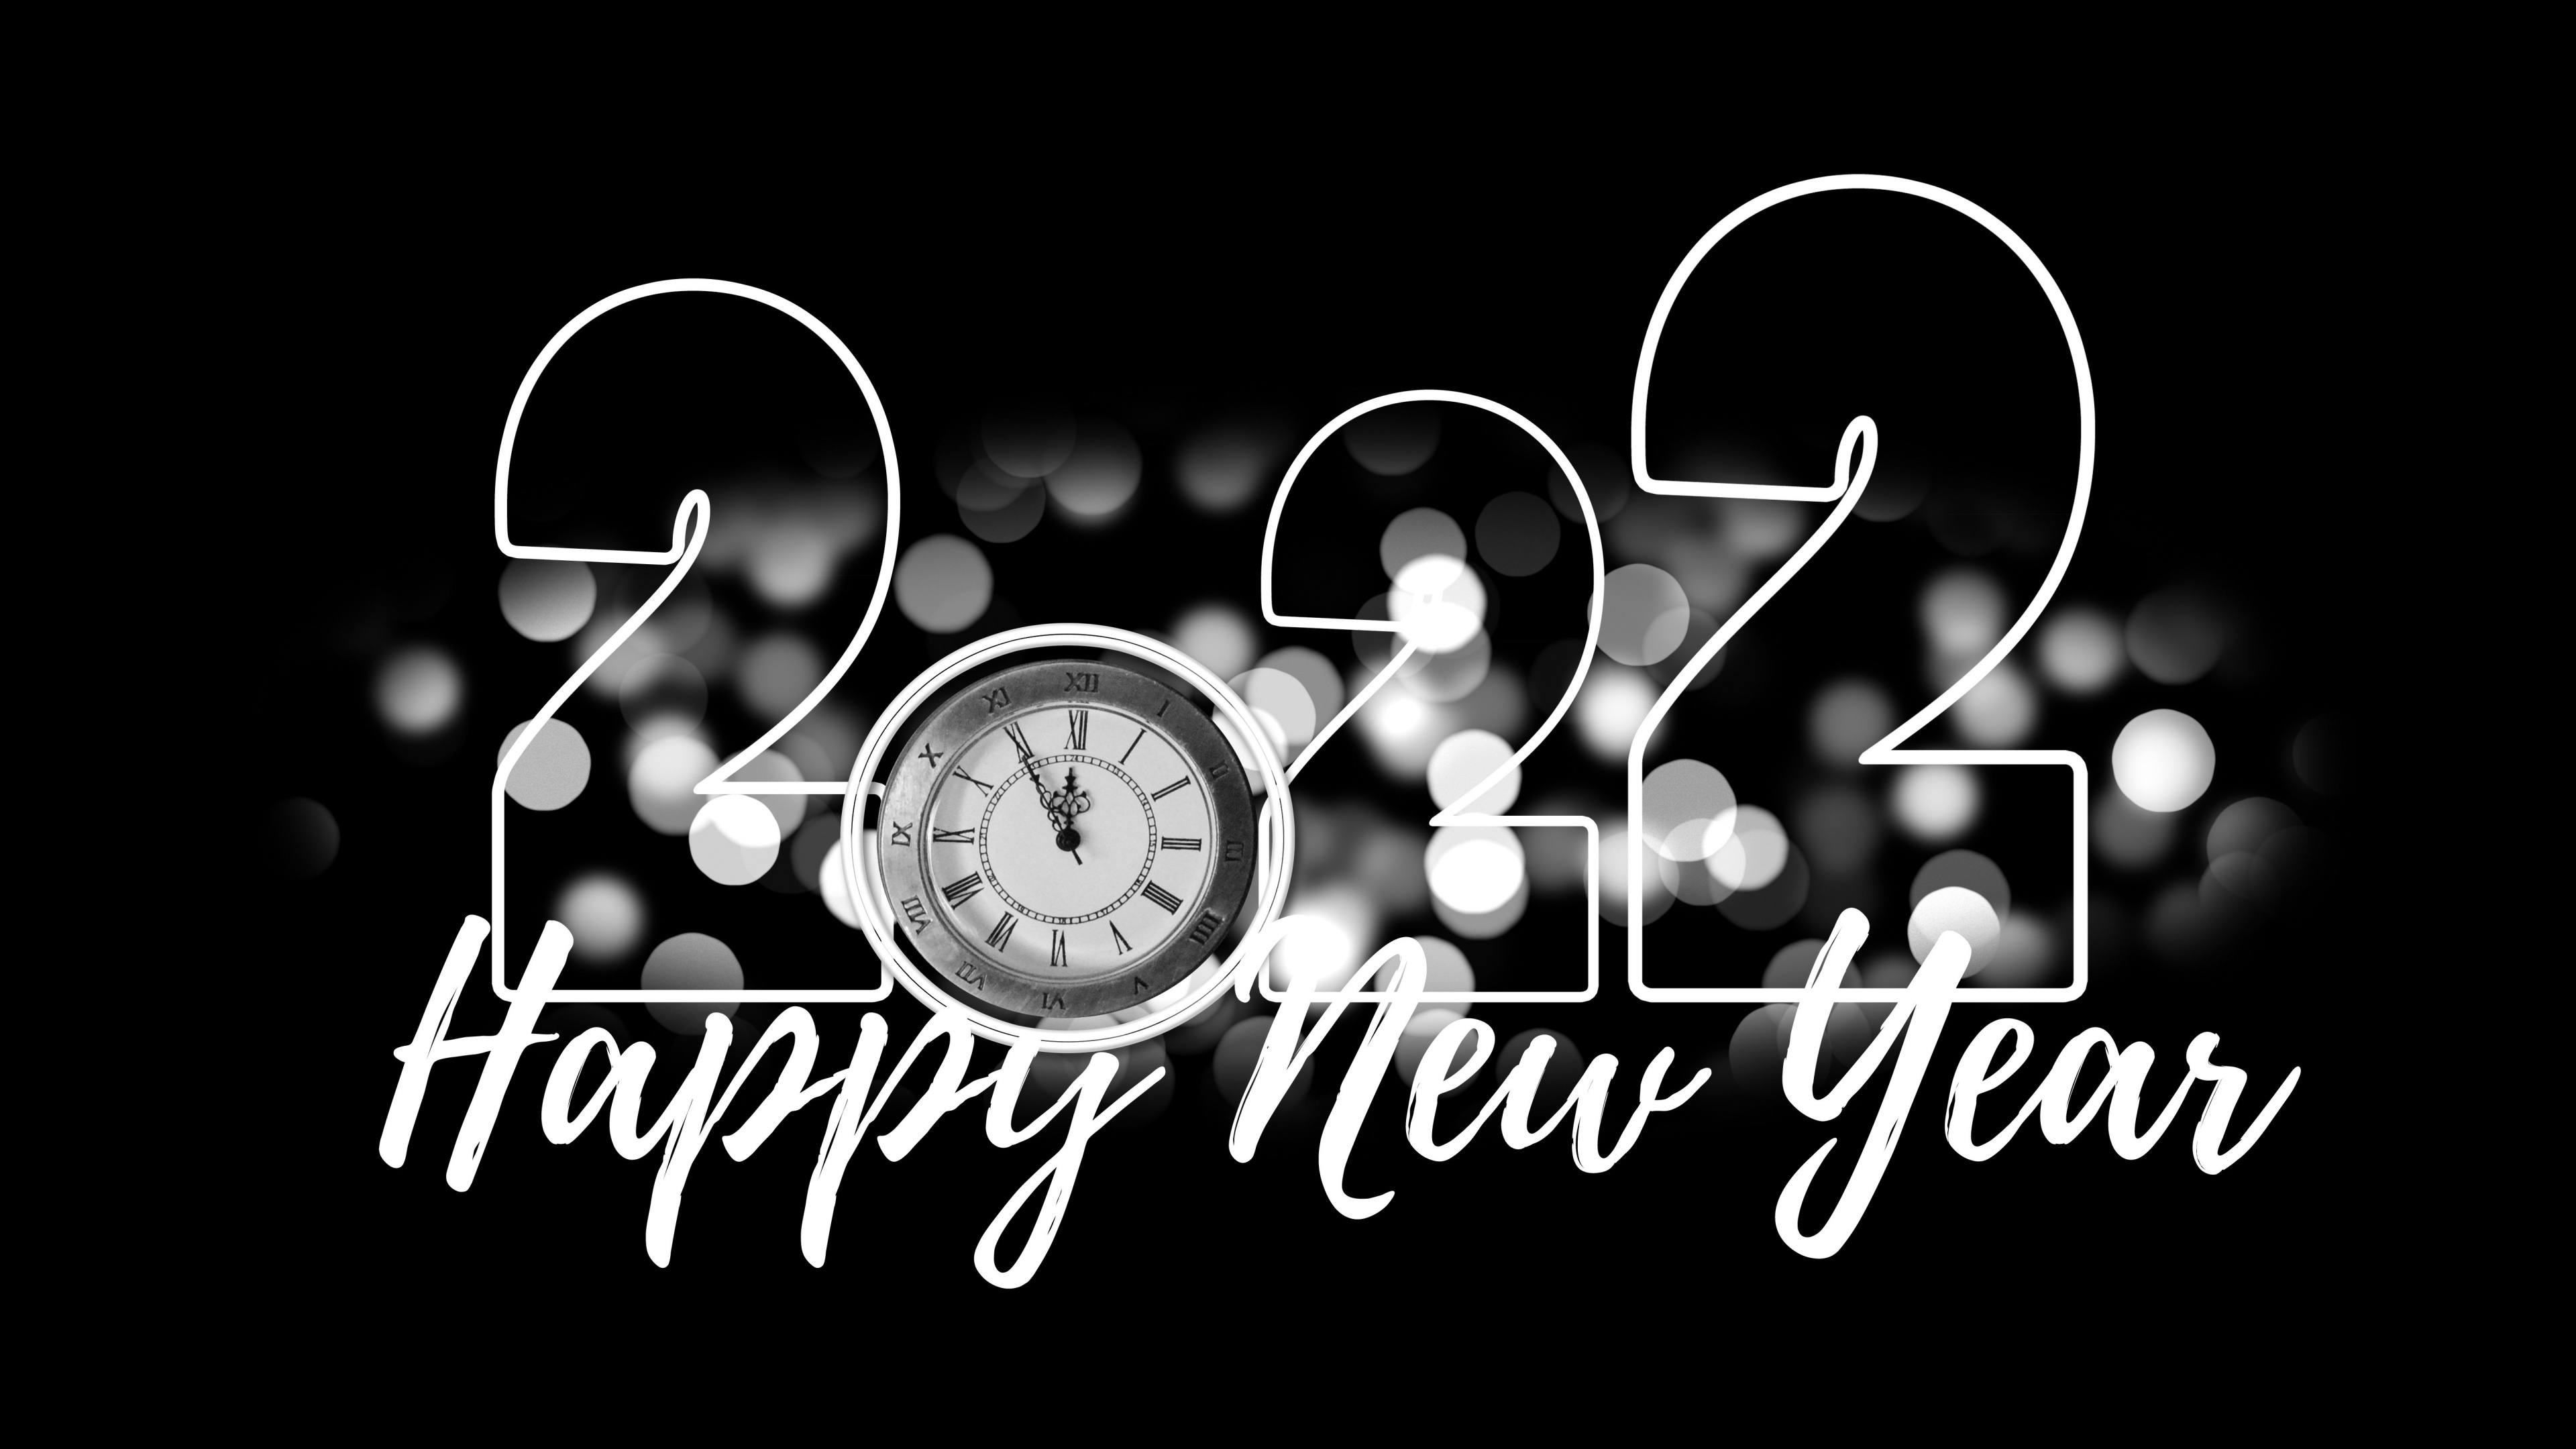 2022 New Year Wallpaper 4K, New Year's Eve, Celebrations/New Year, #6934